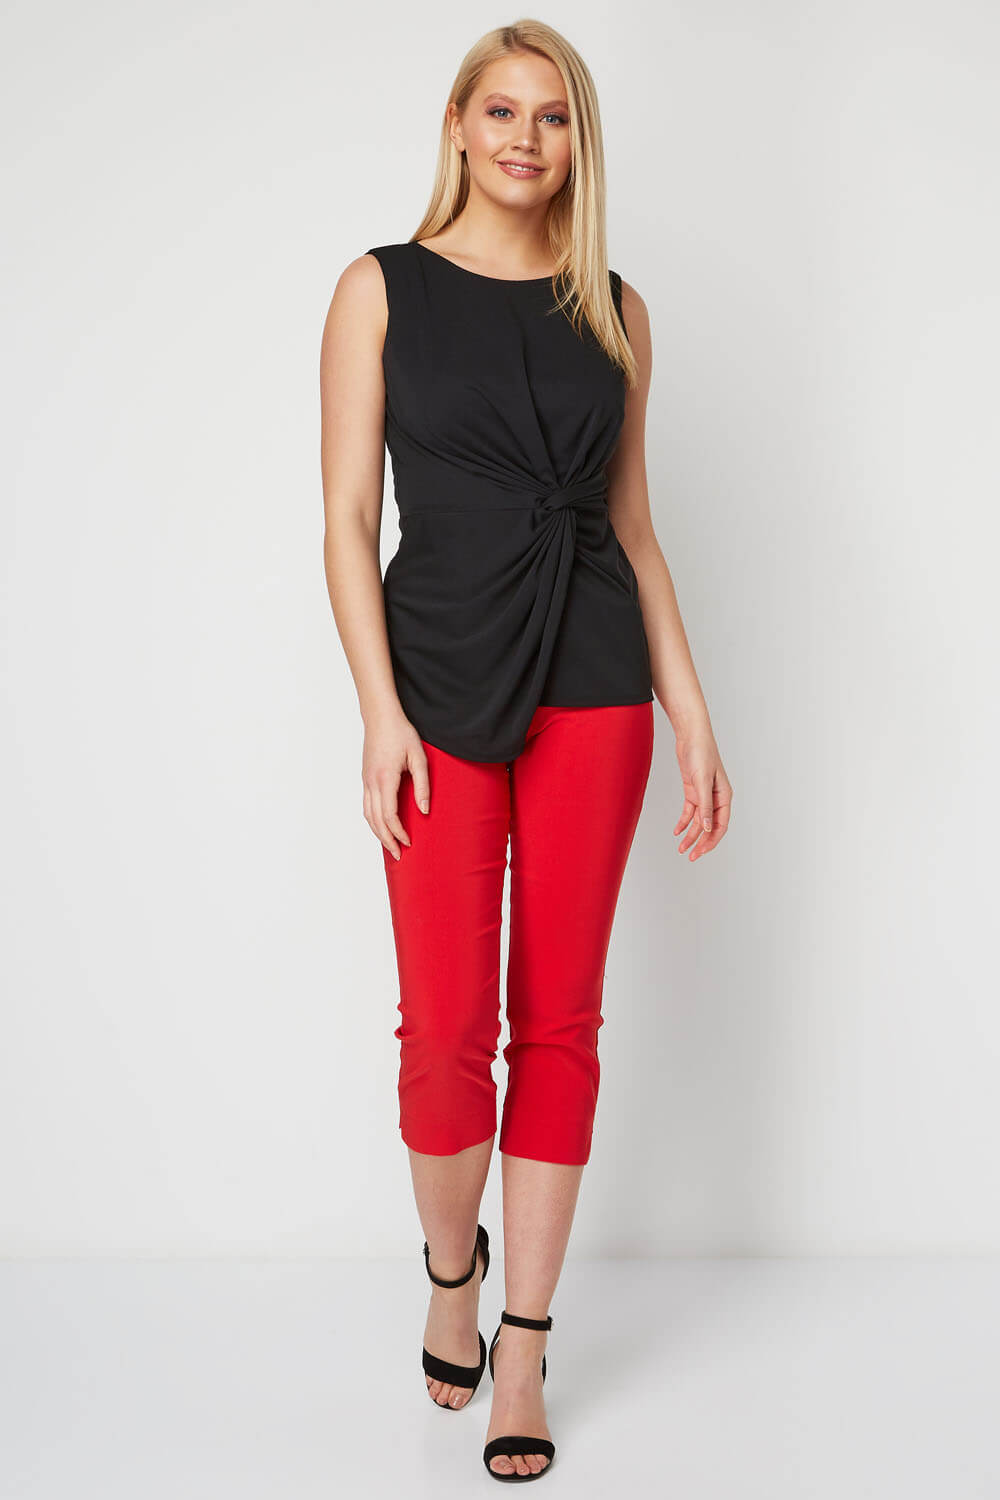 Black Sleeveless Knot Front Top , Image 2 of 8